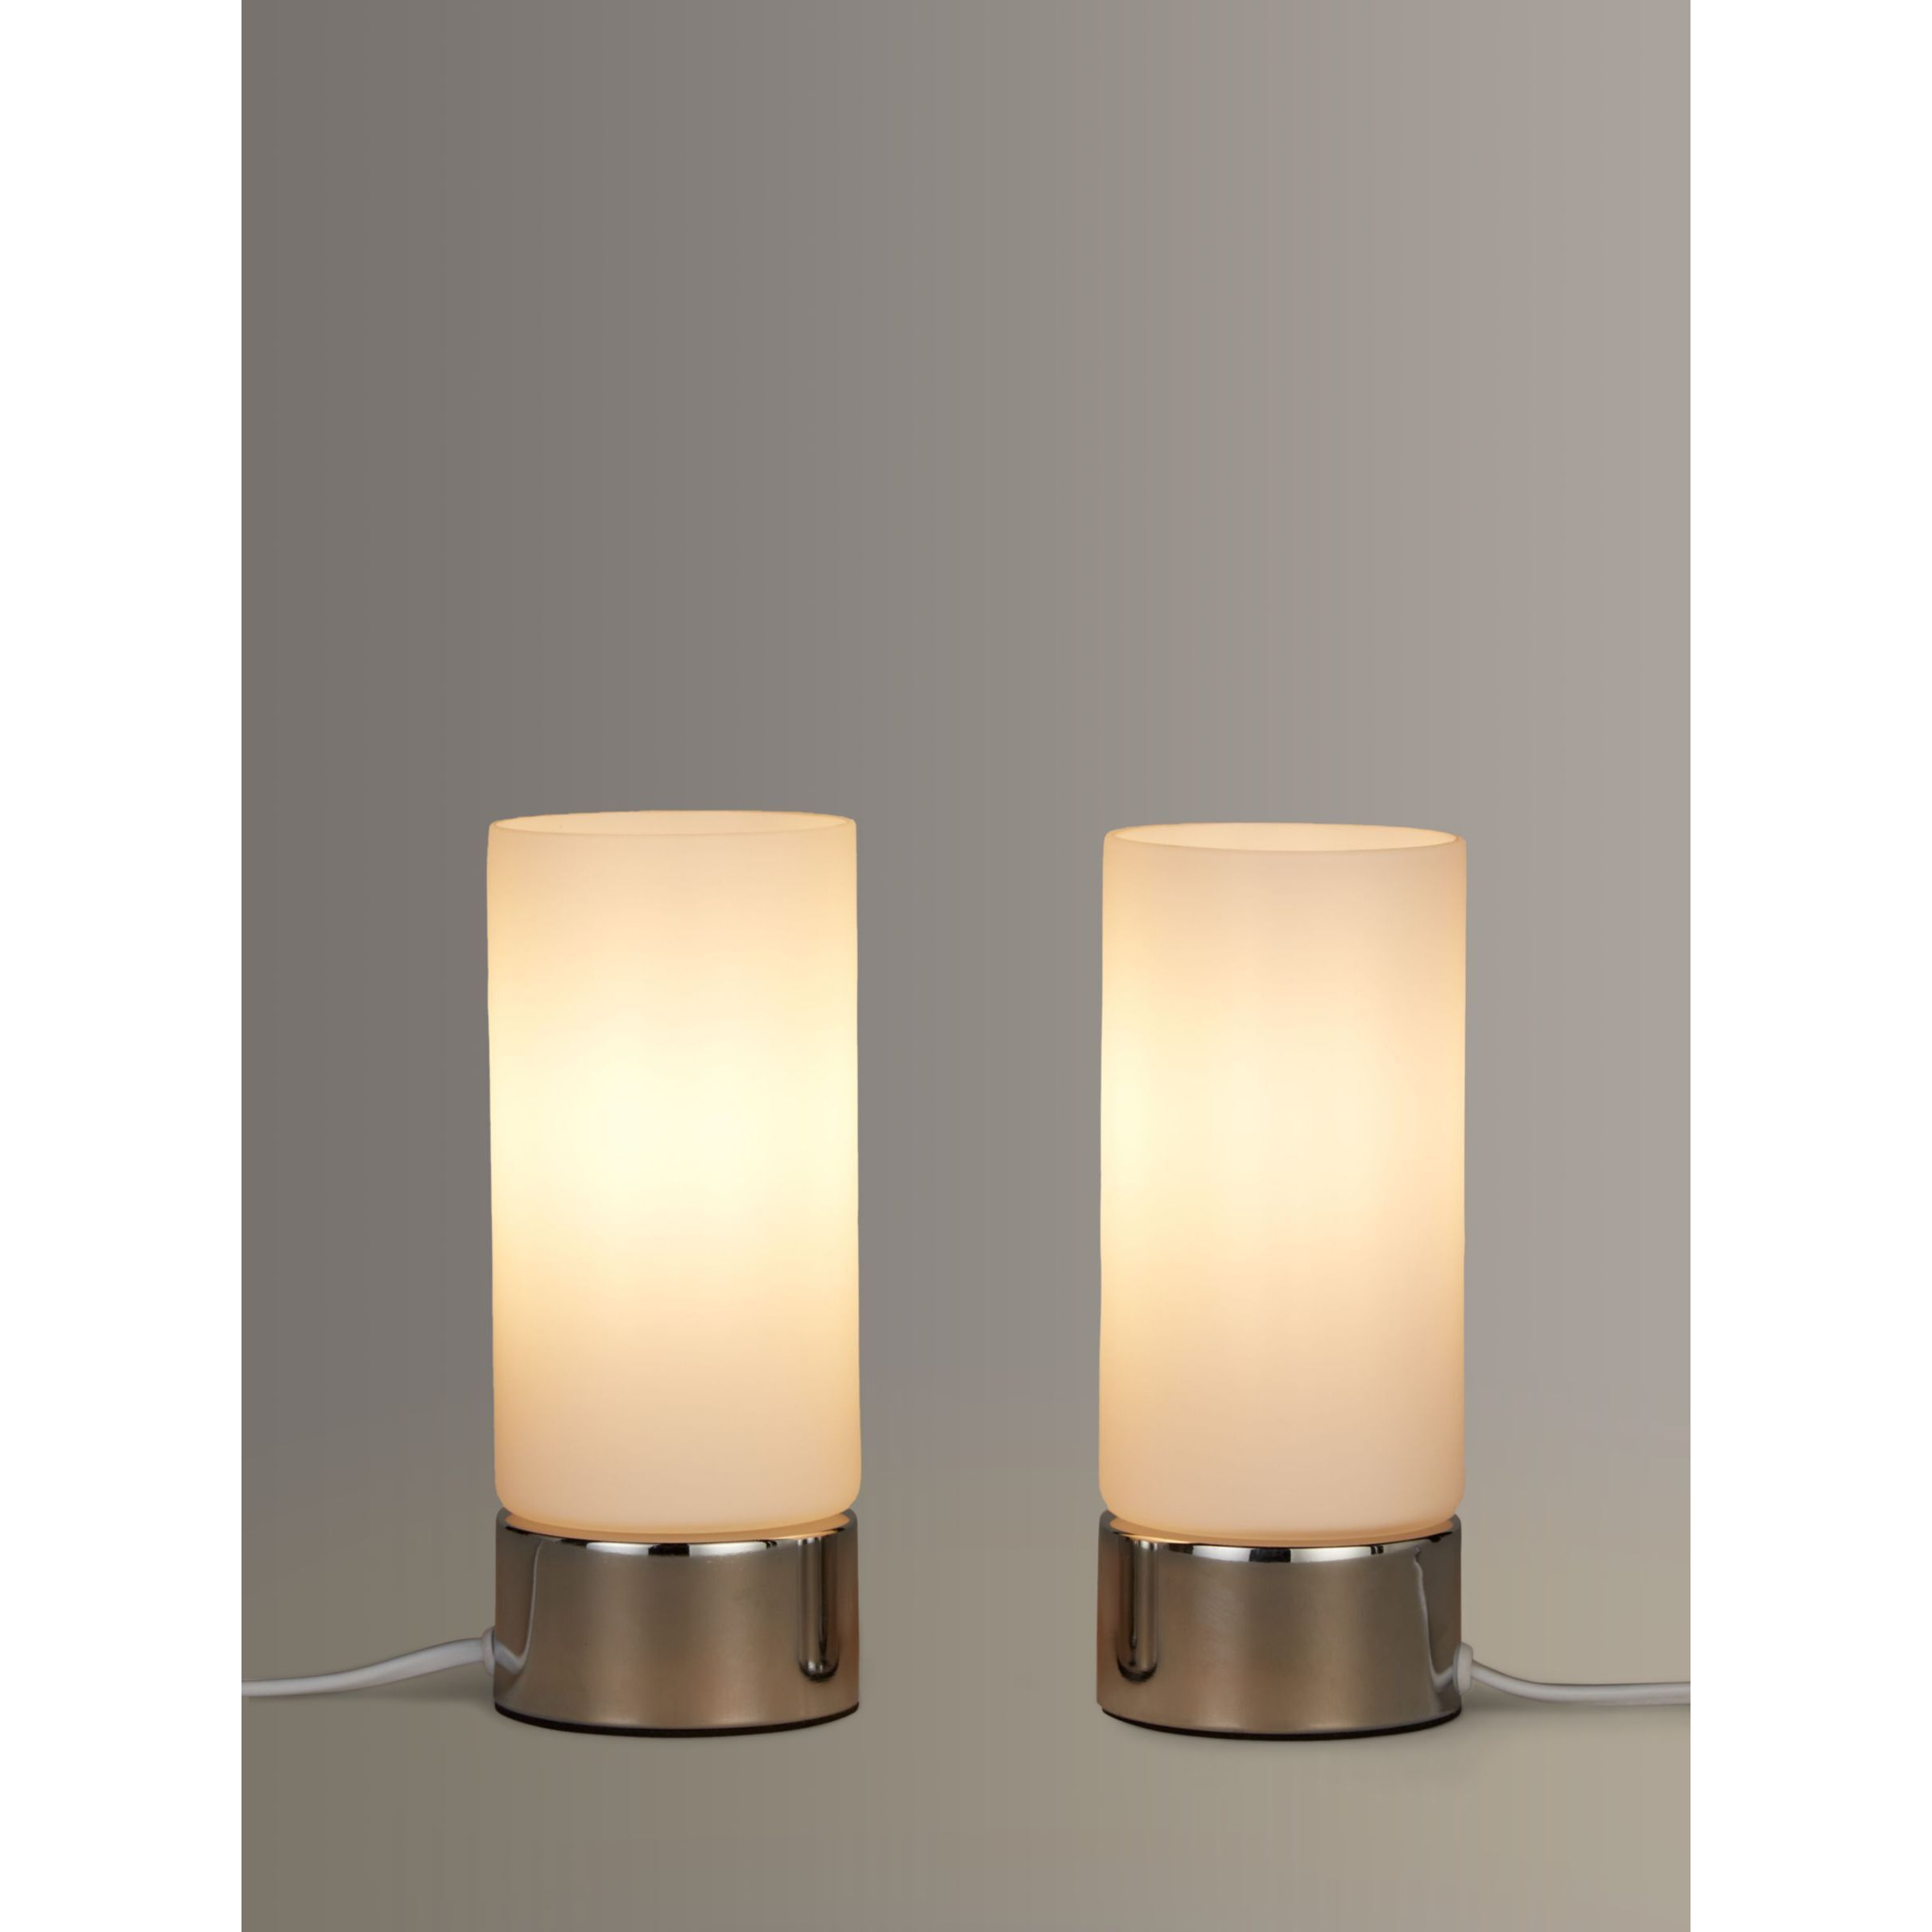 John Lewis ANYDAY Cara Glass Touch Lamps, Set of 2 - image 1